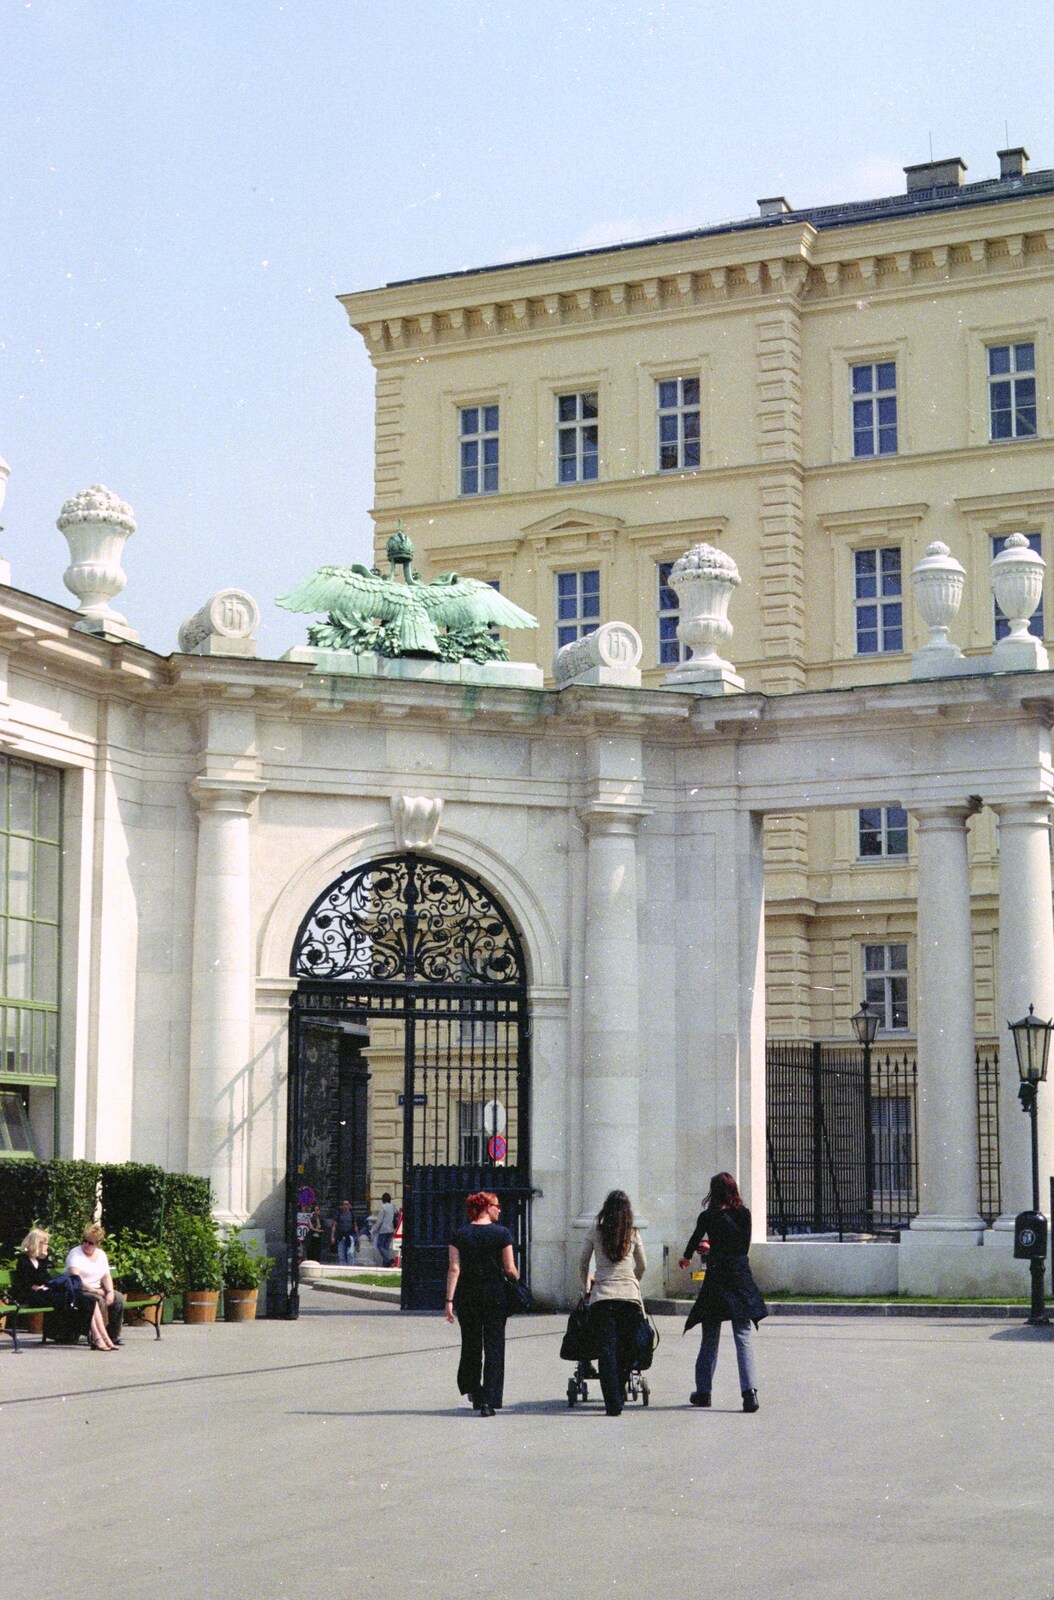 A gate somewhere from A Postcard From Hofburg Palace, Vienna, Austria - 18th April 2000